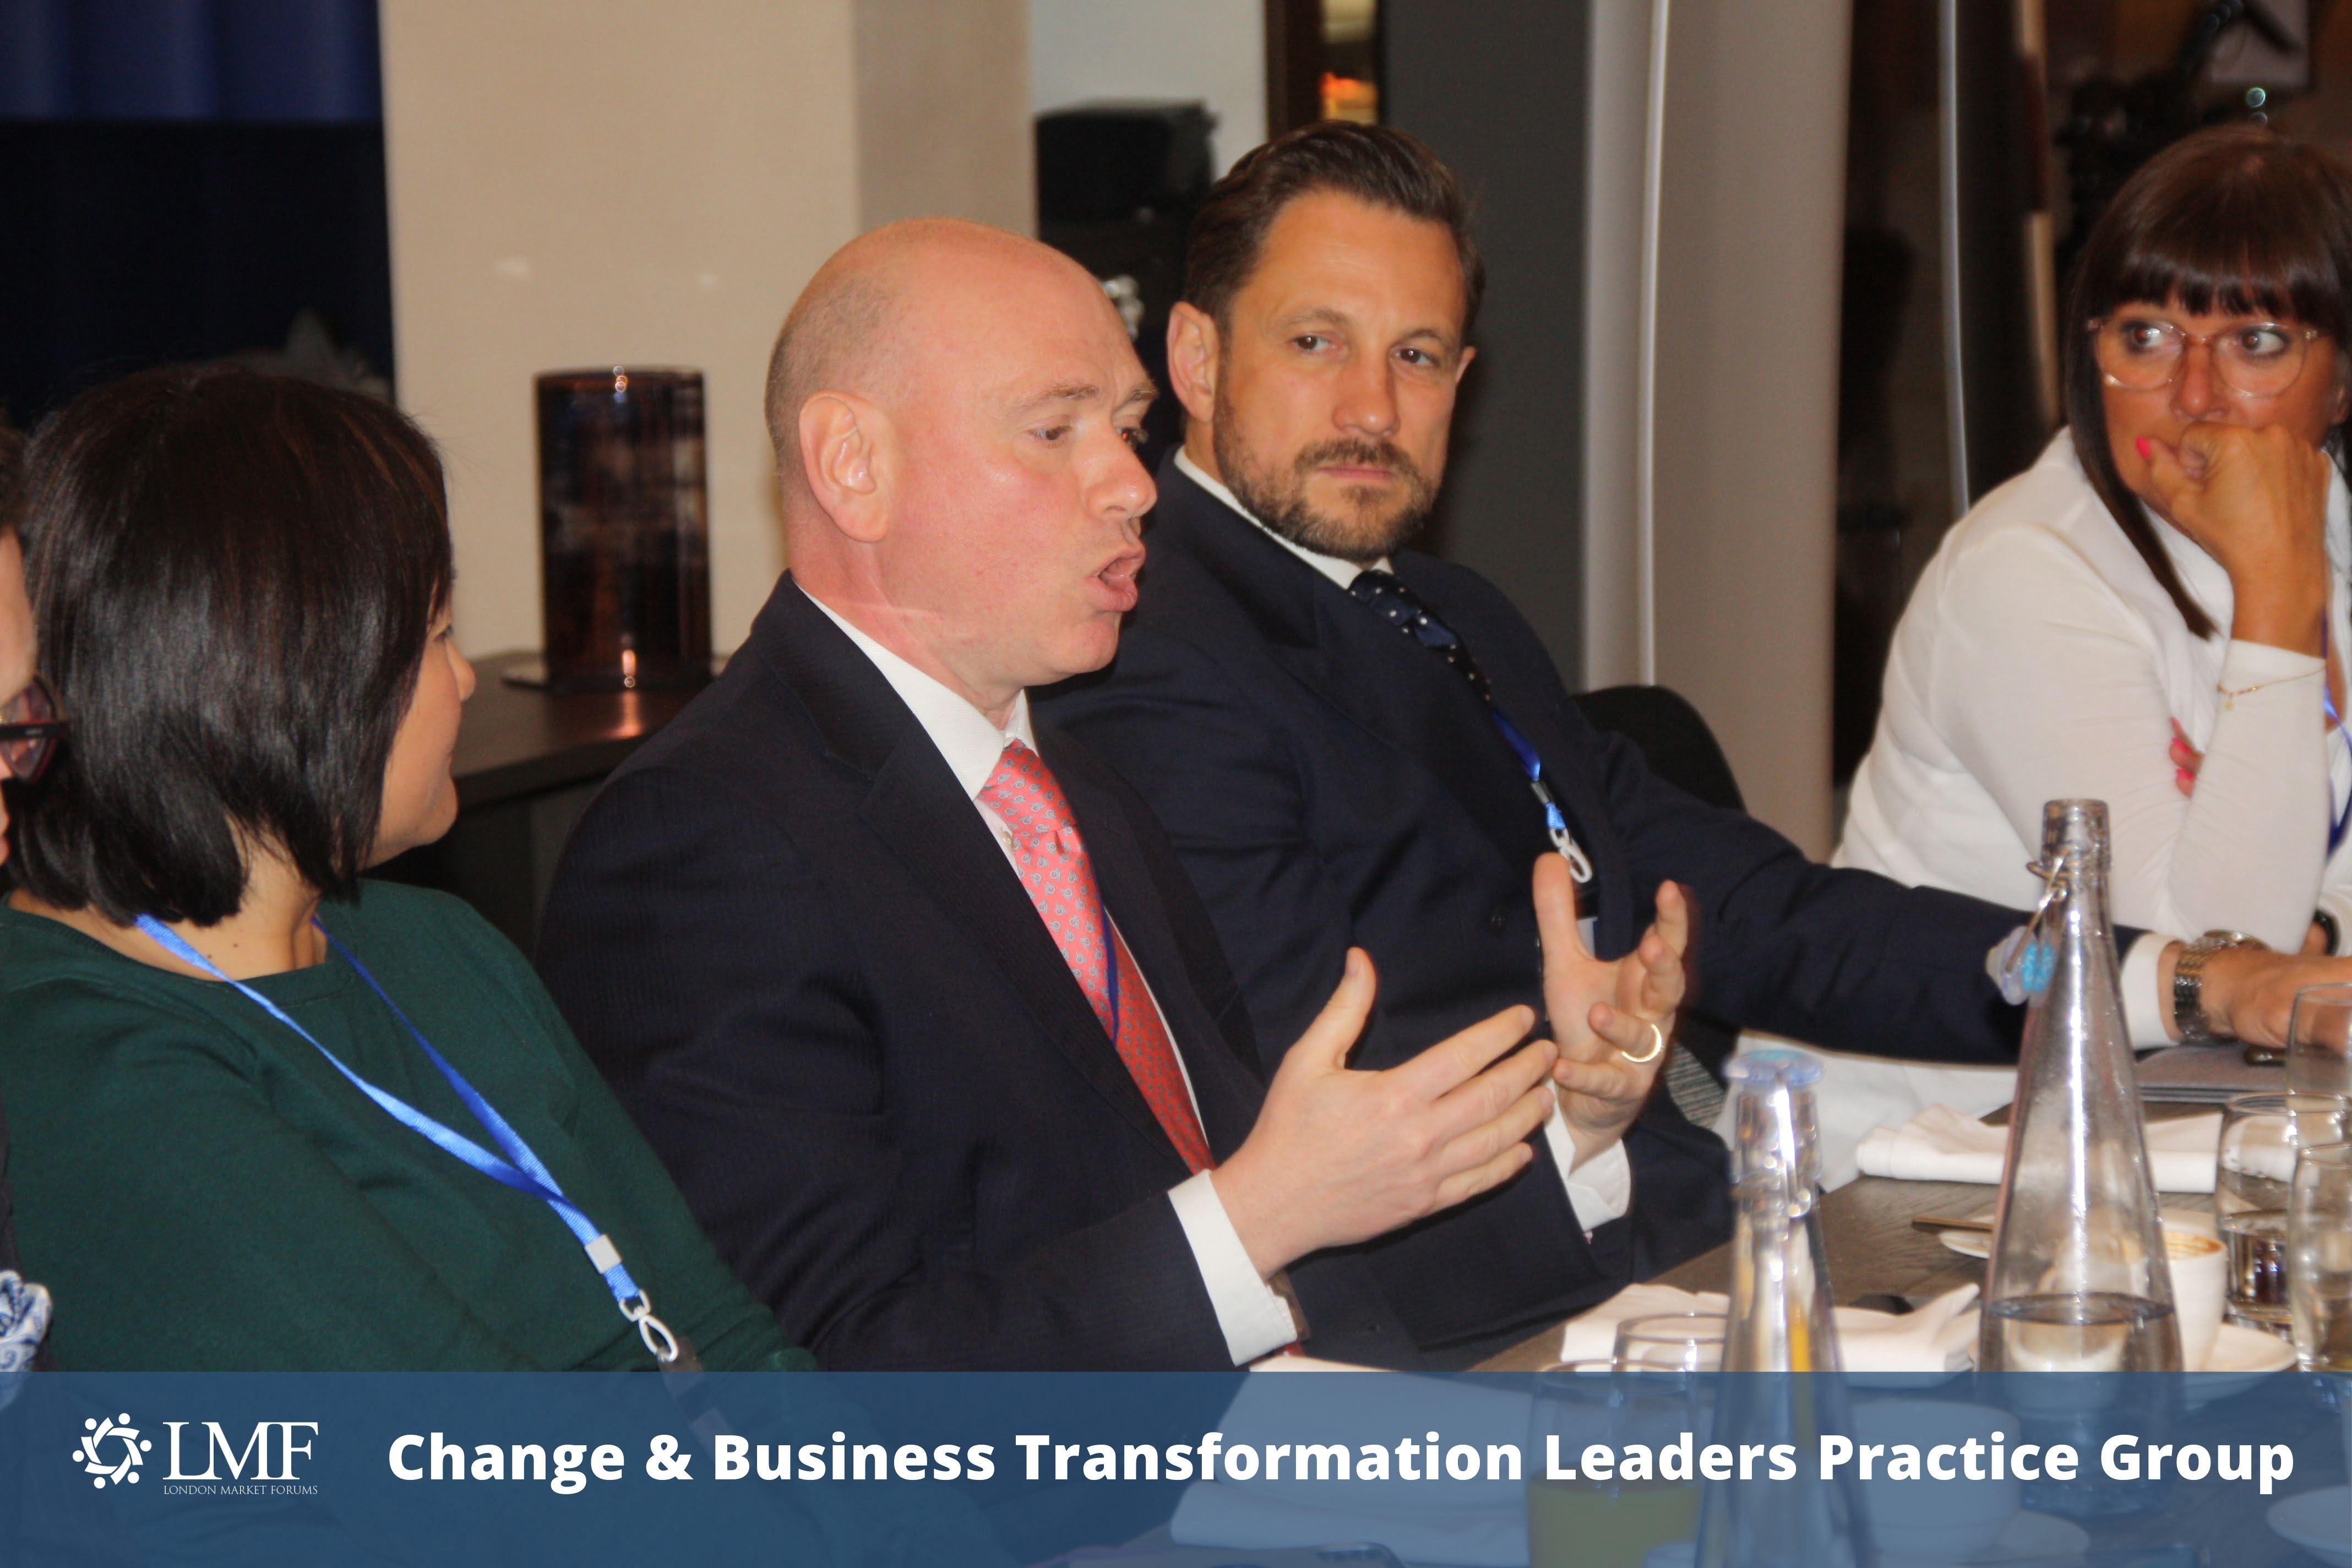 Change & Transformation Leaders Practice Group 26th April 2022